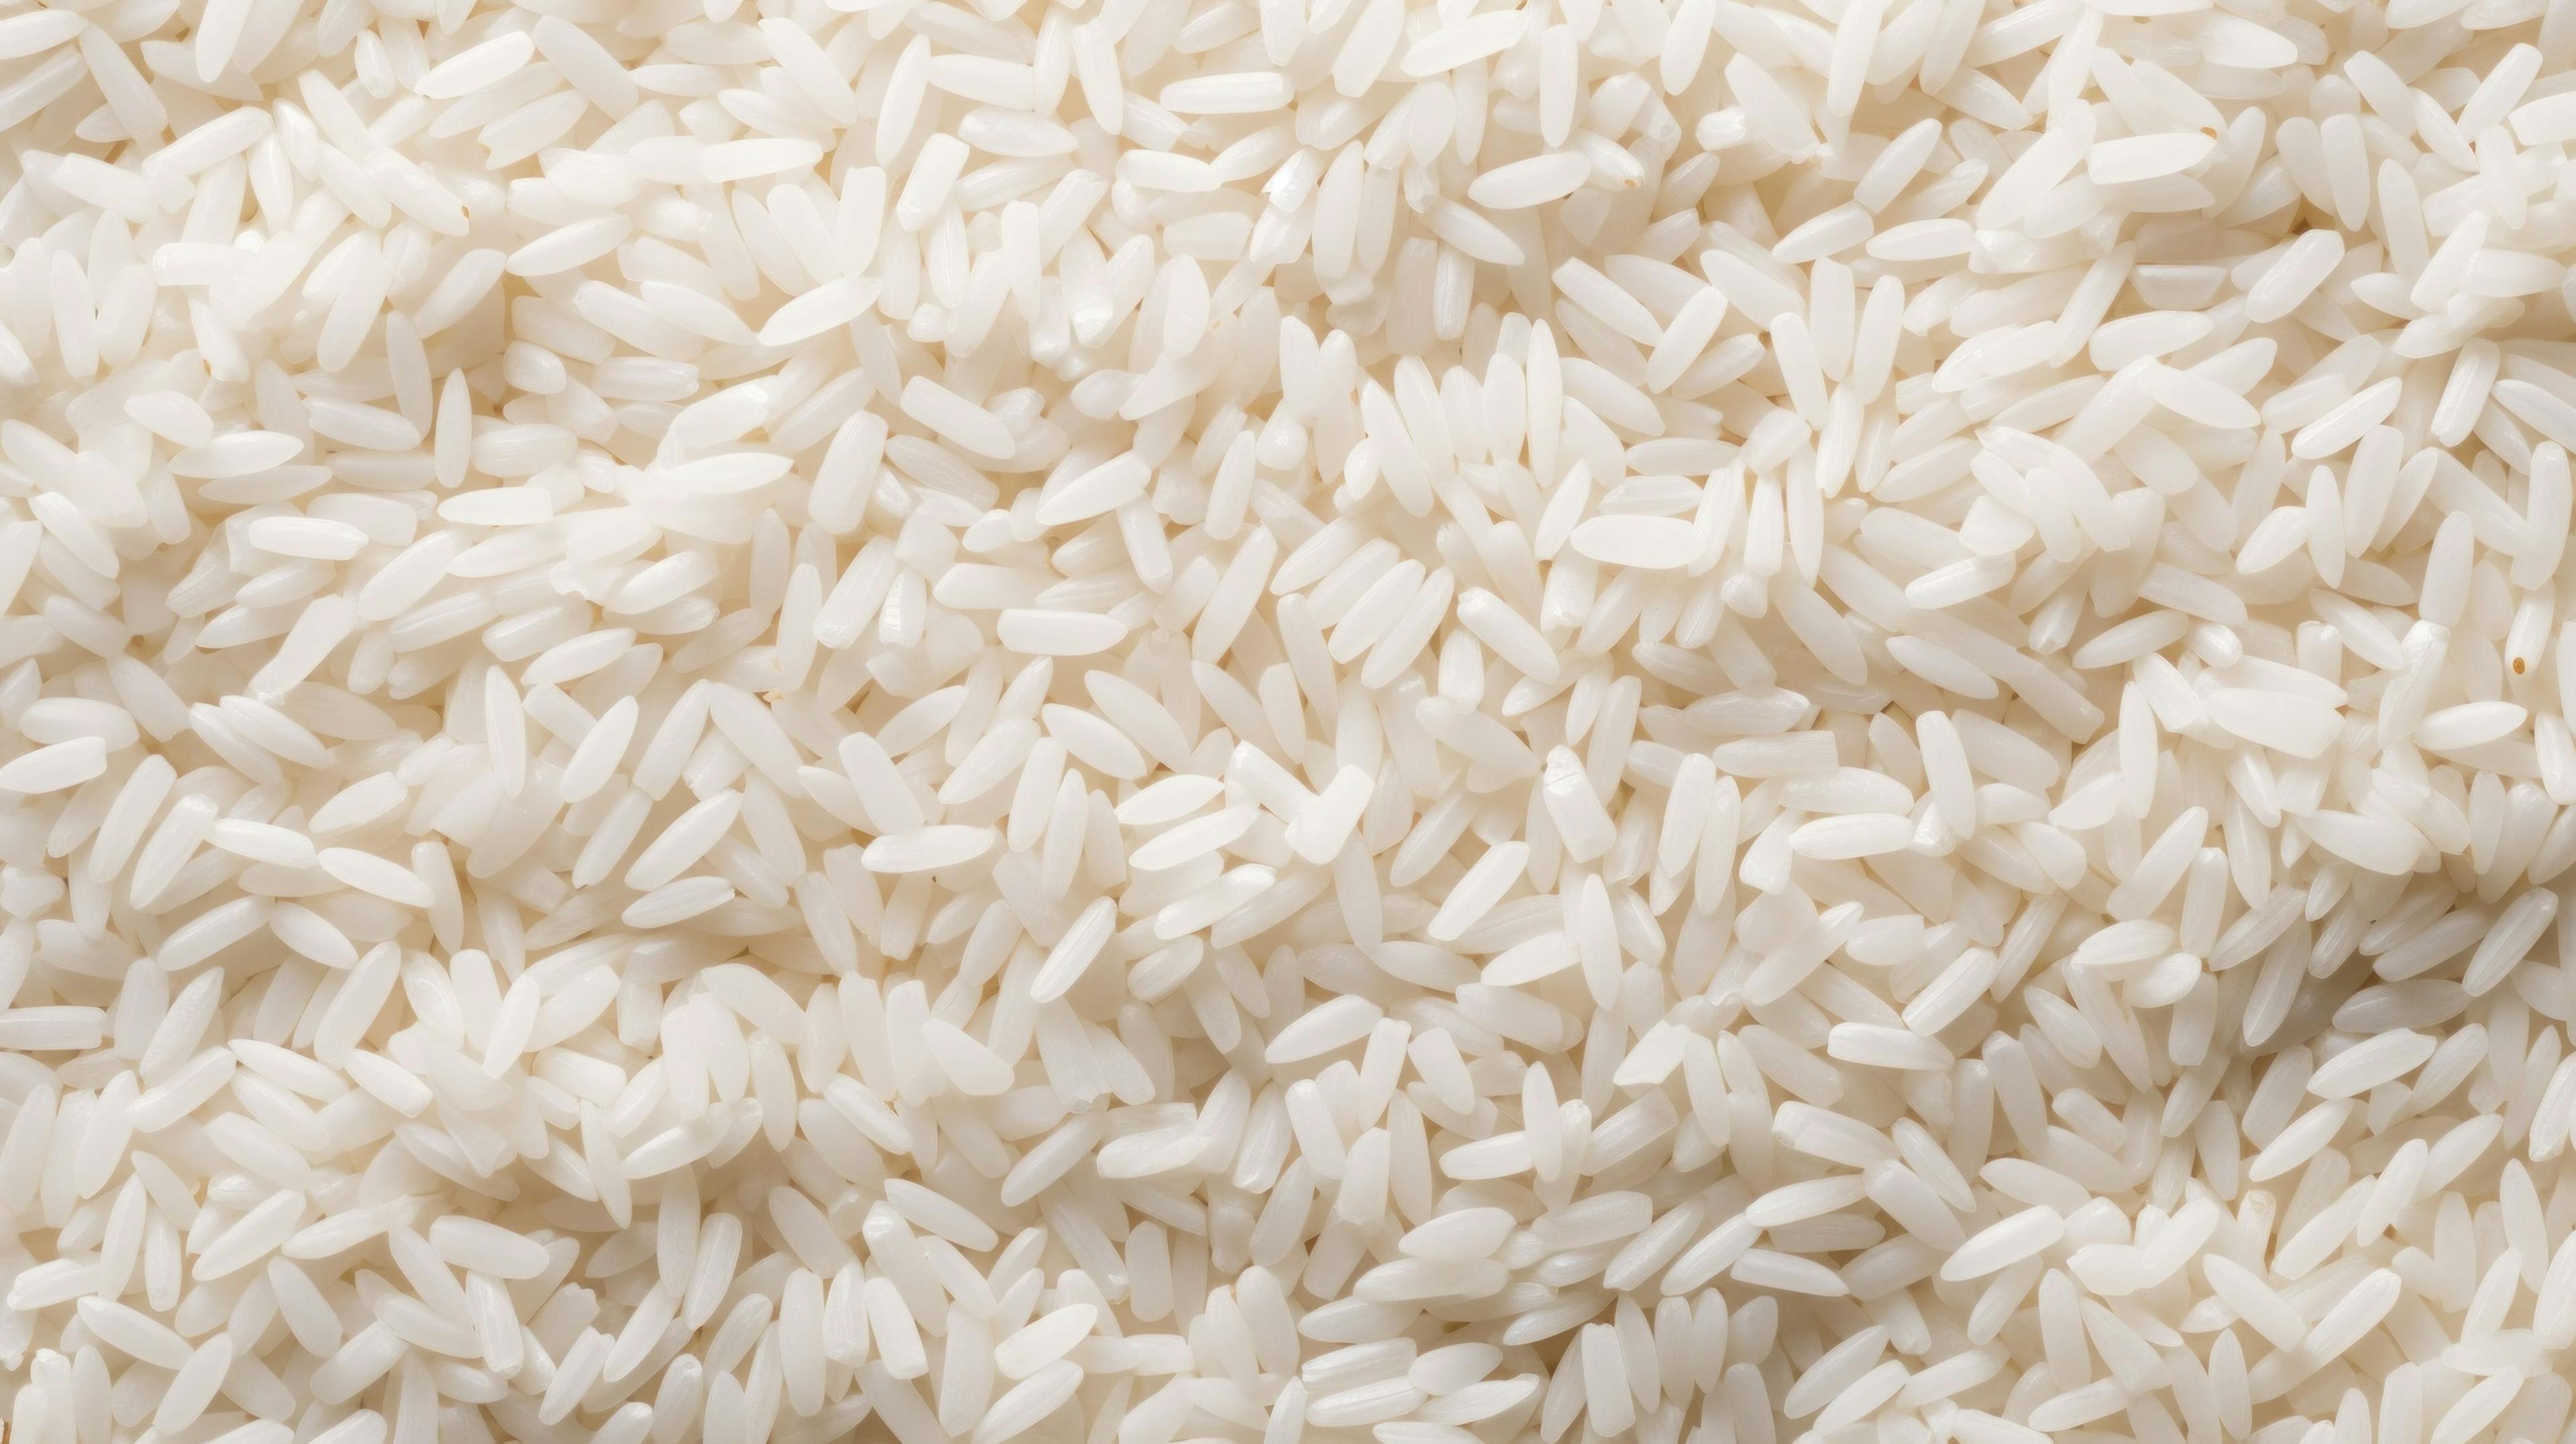 Top view of white rice seeds texture background. Organic rice grain. Flat lay, top view. Generated with AI. | Image Credit: © Maroubra Lab - stock.adobe.com